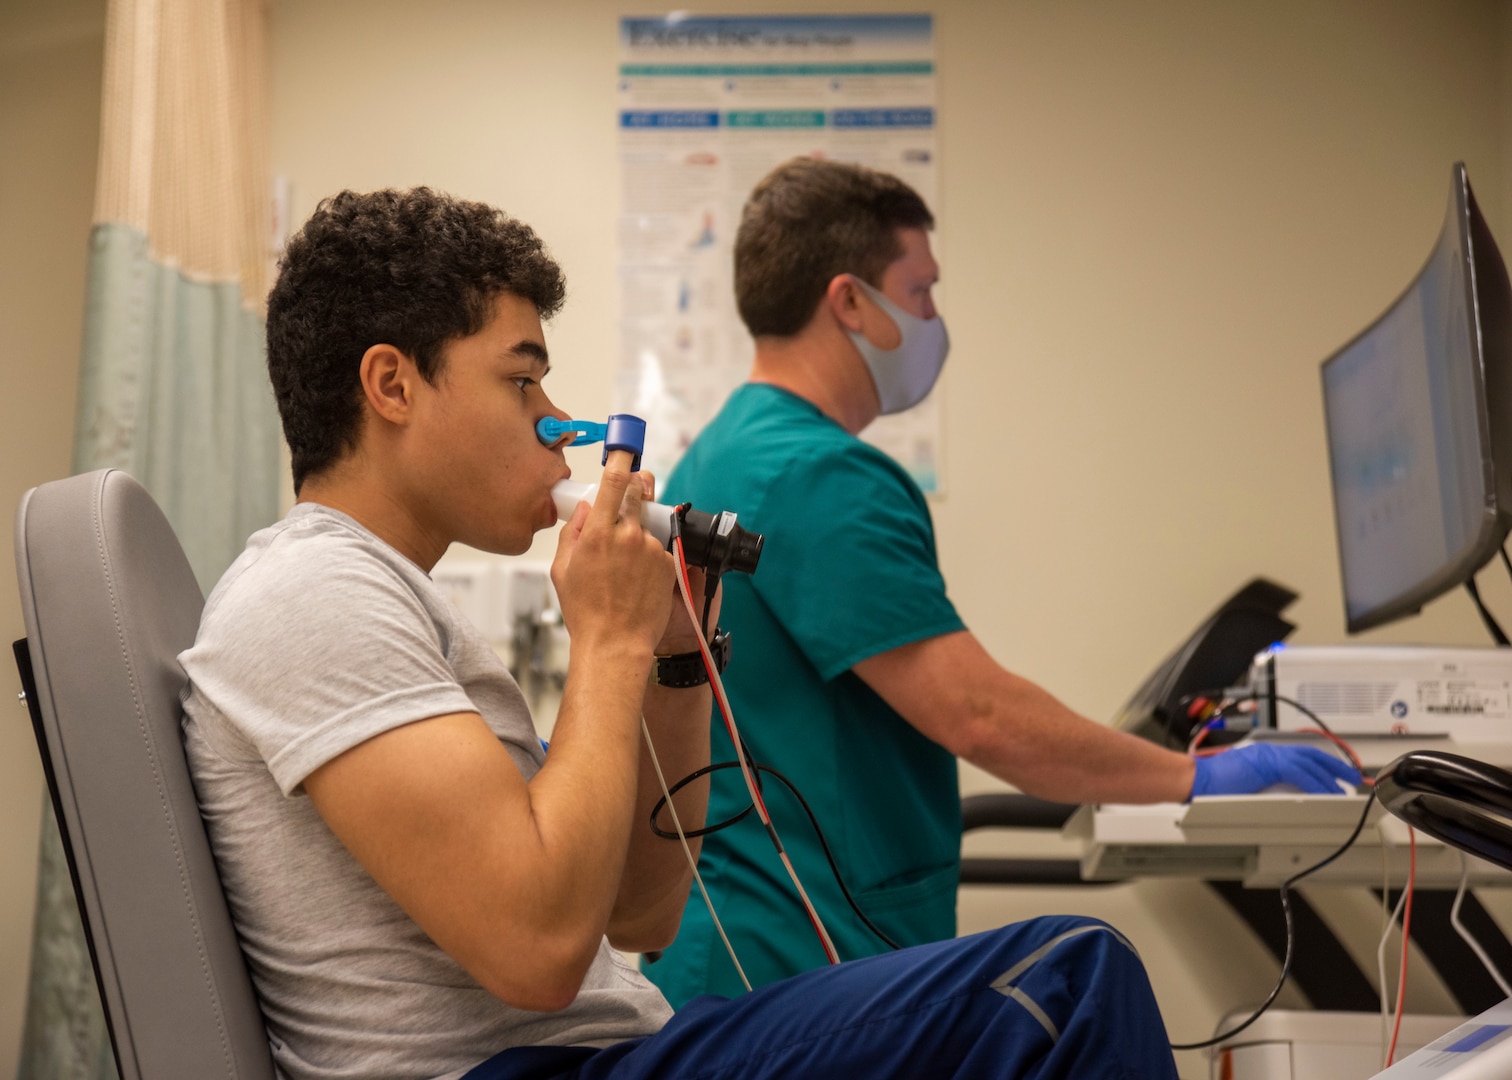 Pulmonary trains with new equipment for a Cardiopulmonary Exercise Test. The CPET is a clinical tool that evaluates exercise capacity and determine cardiac or lung conditions. It assesses the patient's exercise responses involving the pulmonary, cardiovascular and skeletal muscle systems.